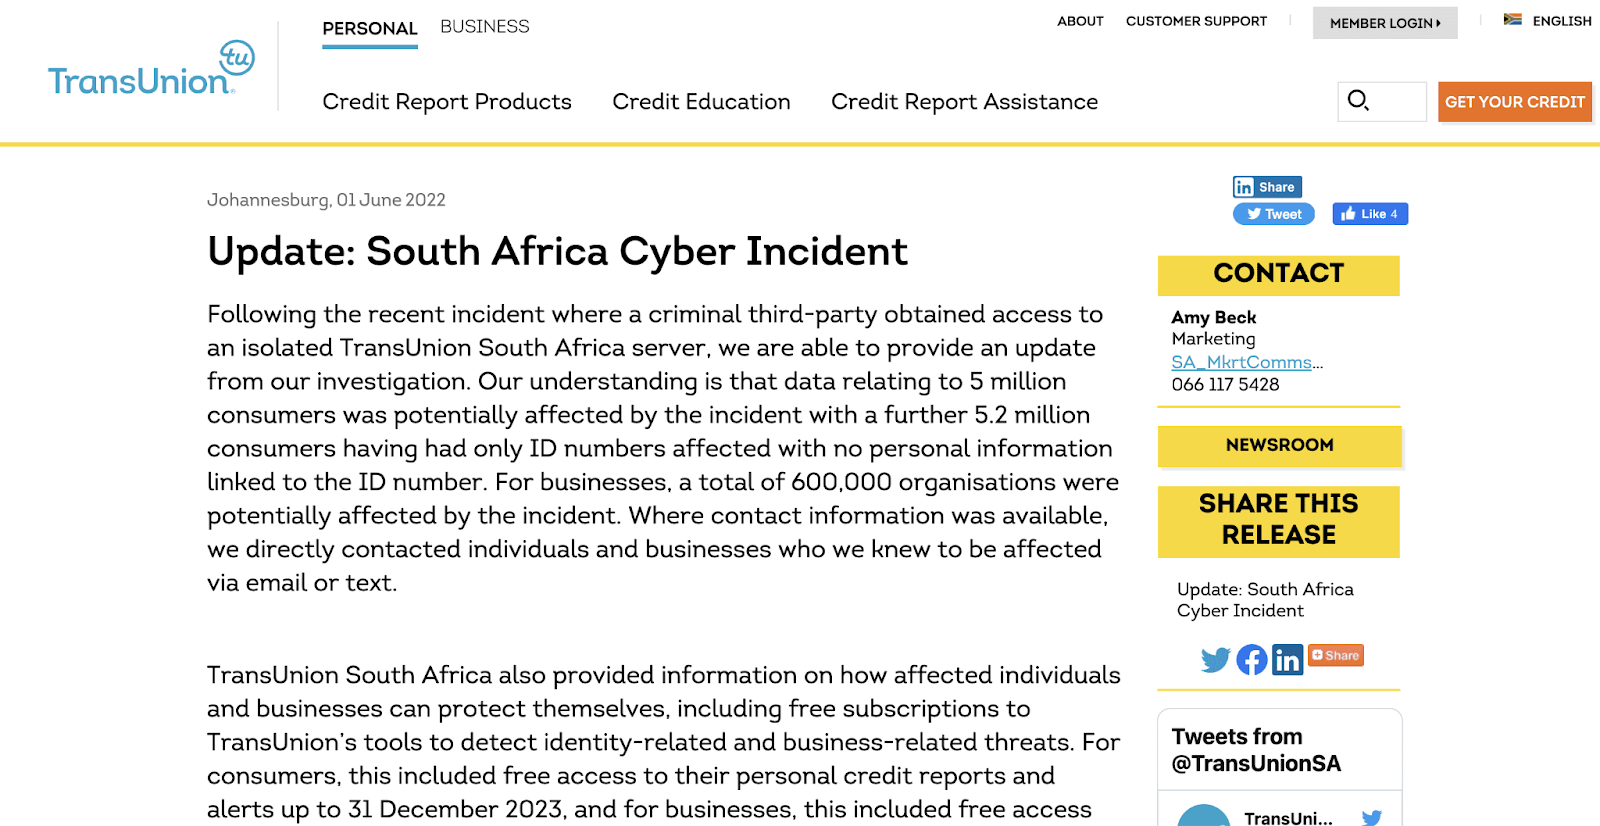 TransUnion South Africa website's official announcement of the data breach
